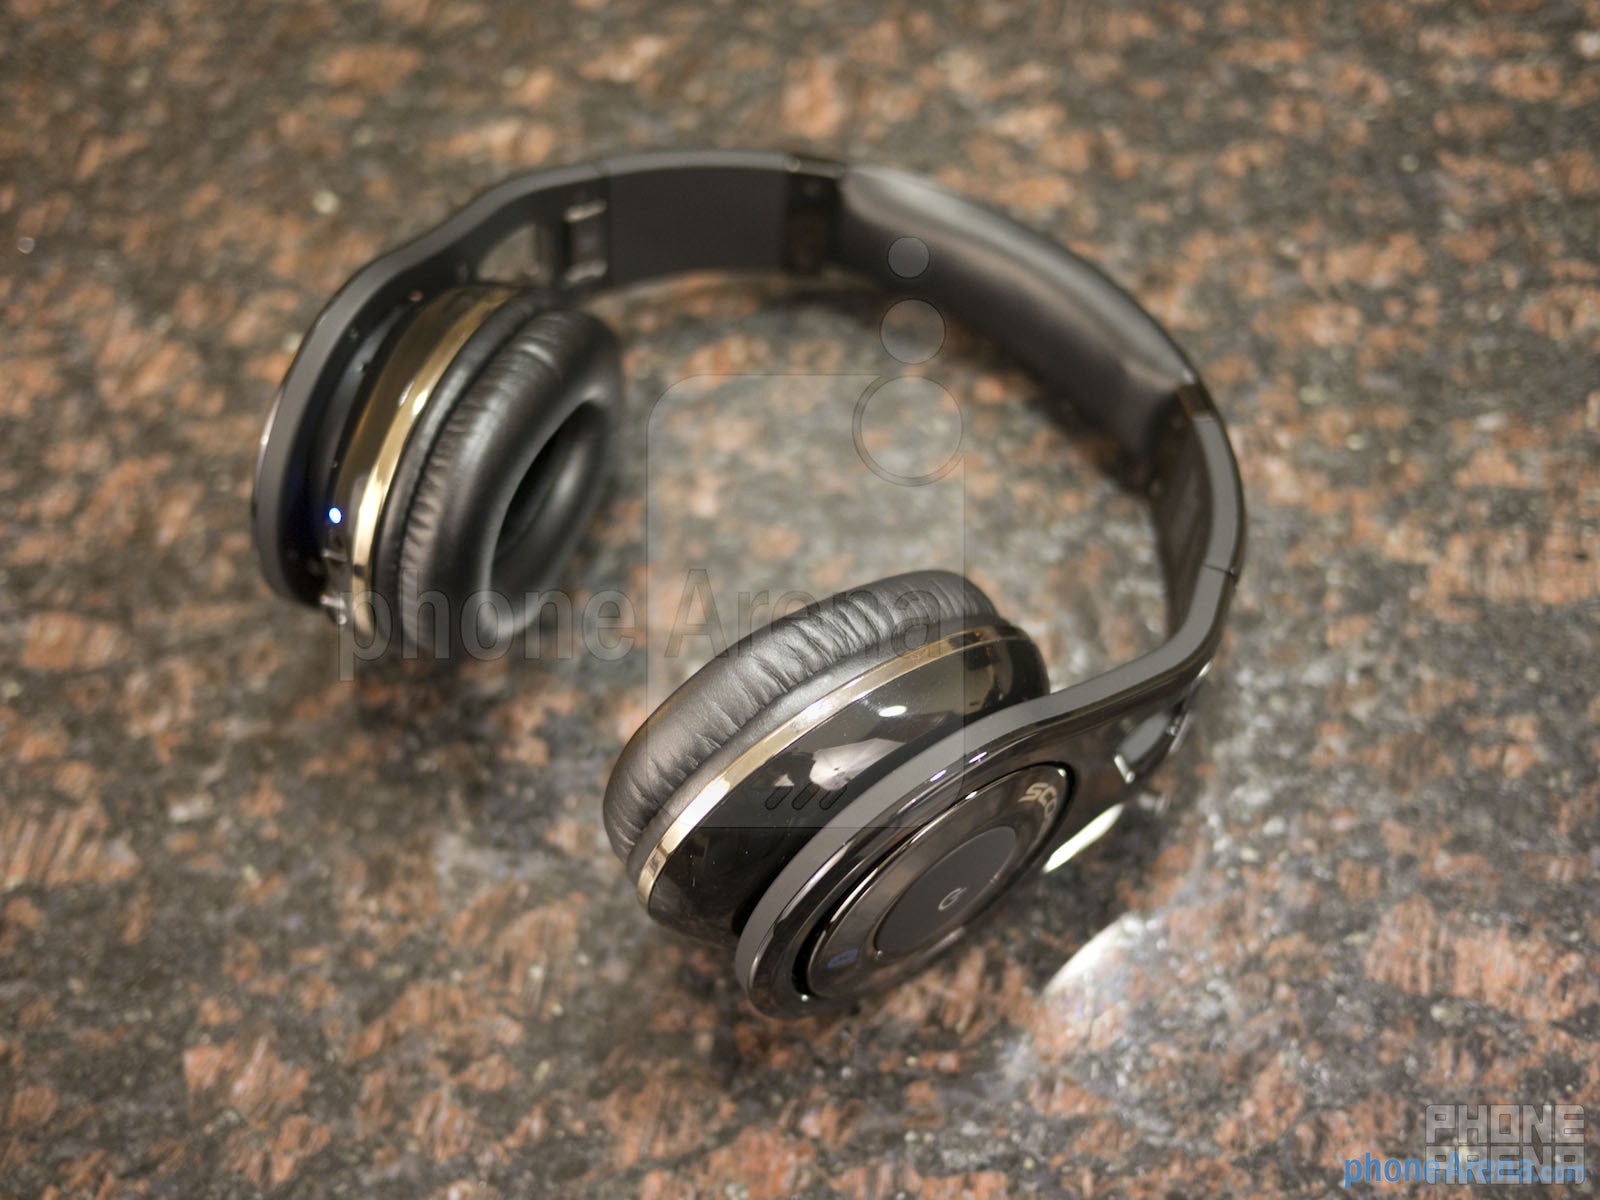 Scosche RS1060 Bluetooth Stereo Headphones Review